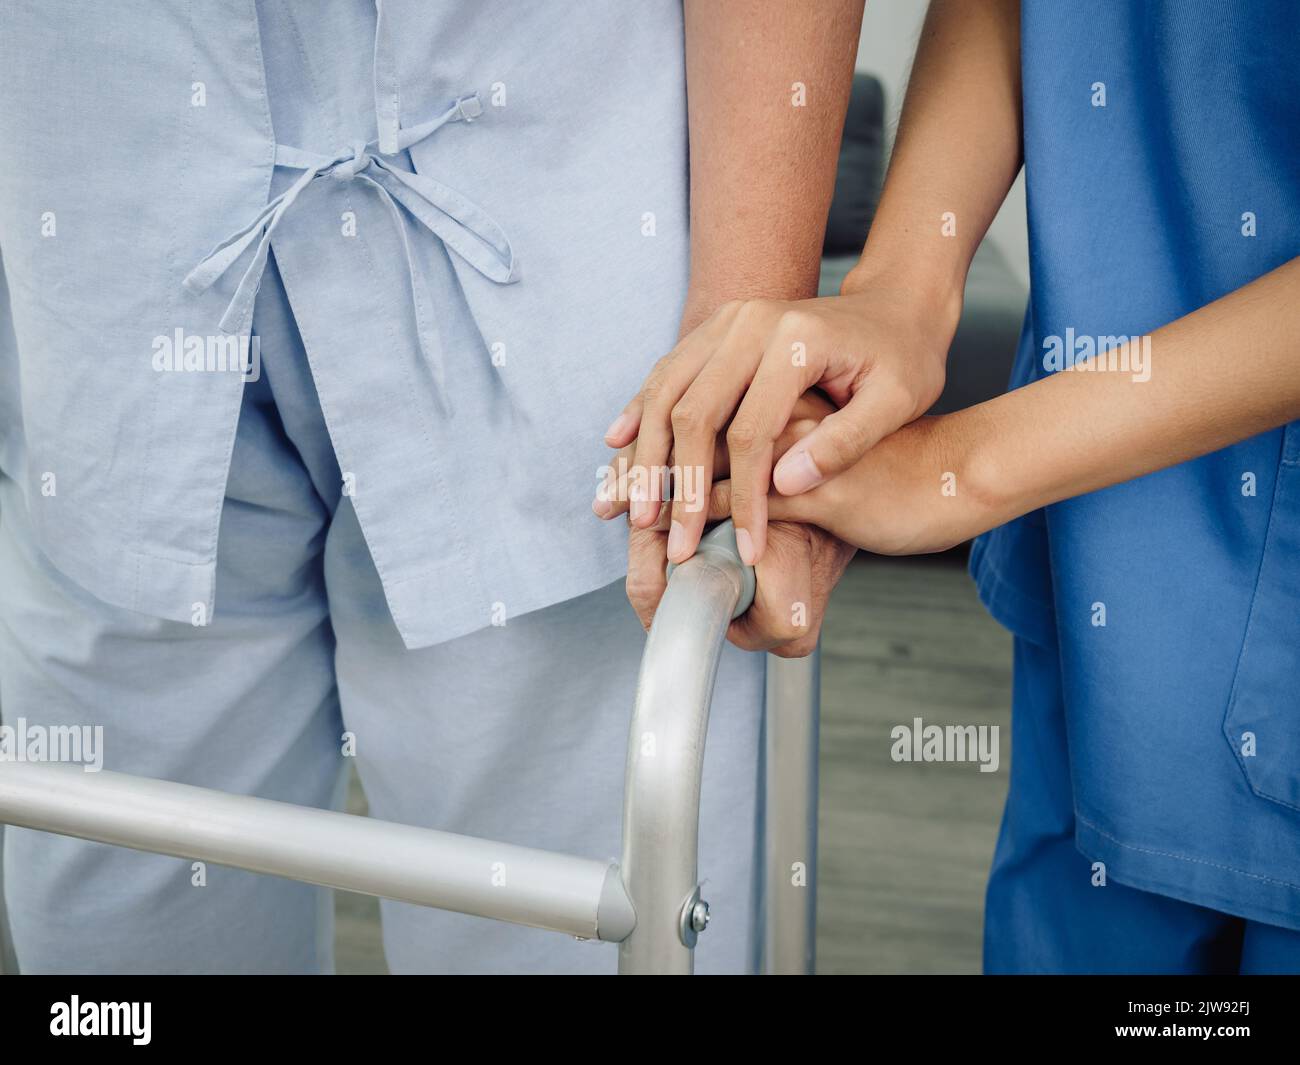 Close-up of nurse's hands, assistant in blue suit holding elderly or older woman's hands for support and care while the older patient tries to walk wi Stock Photo